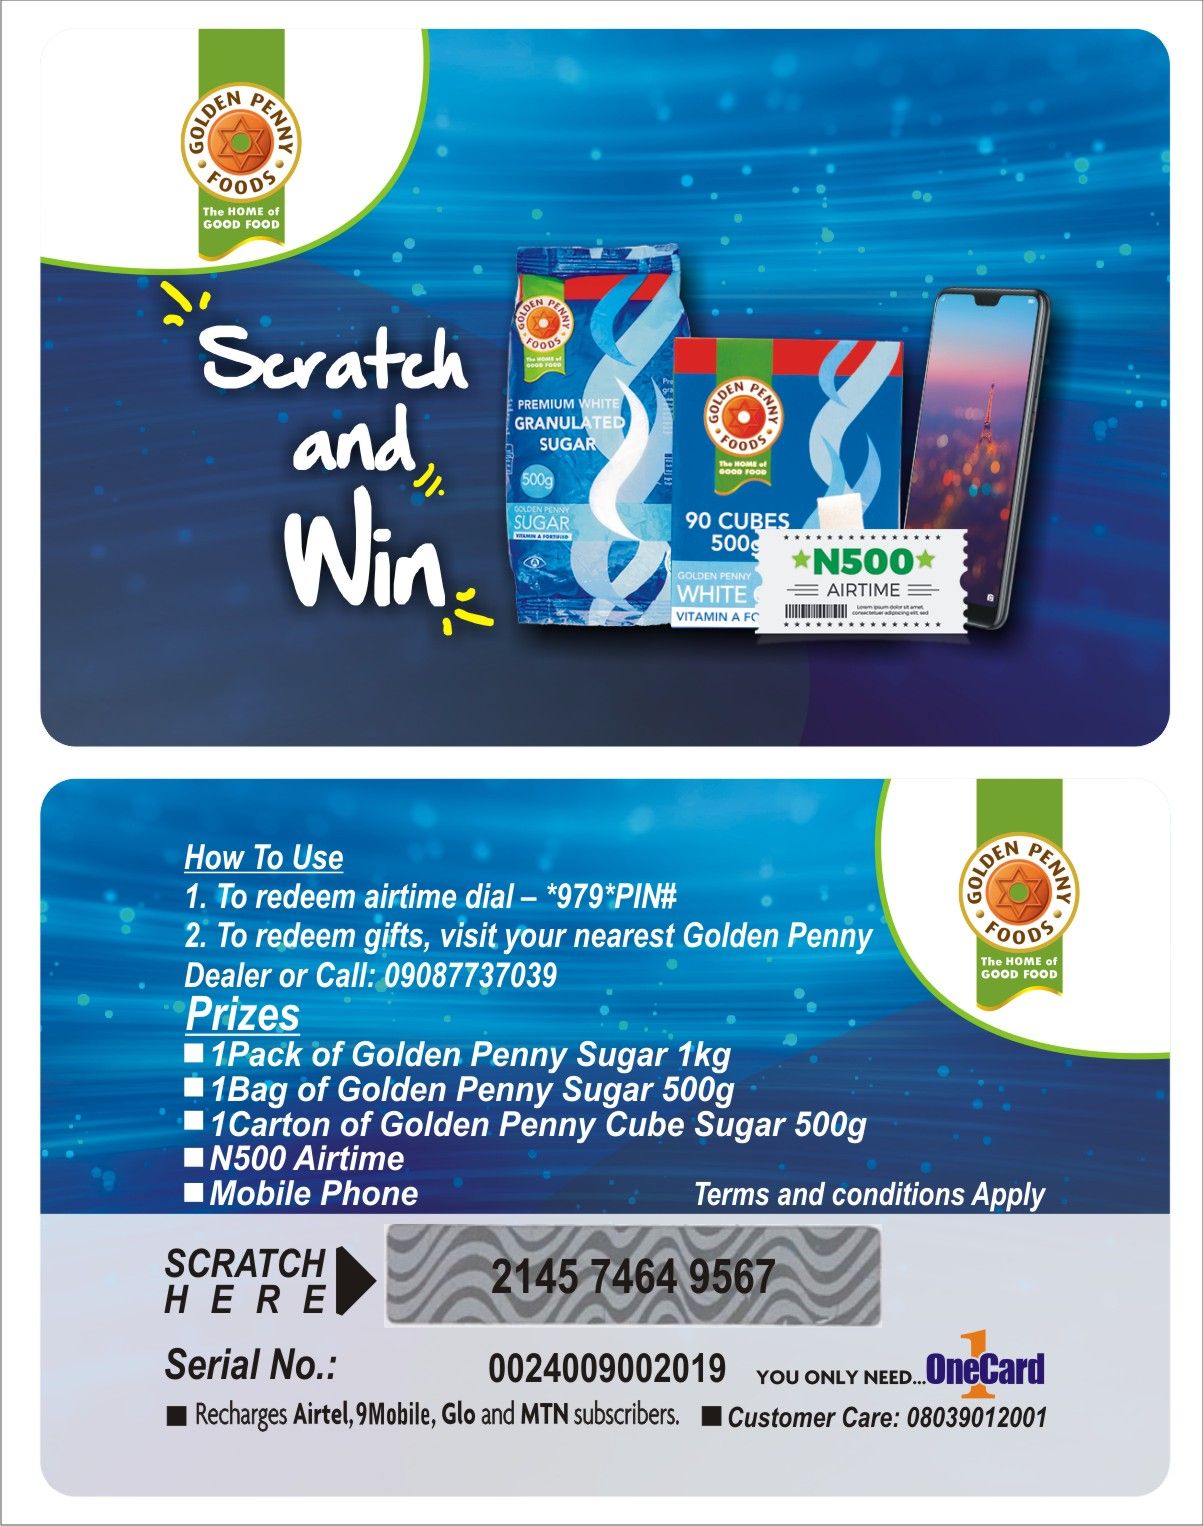 CALL CHINEDU 08179651585 TO PRINT SCRATCH AND WIN PROMO CARDS